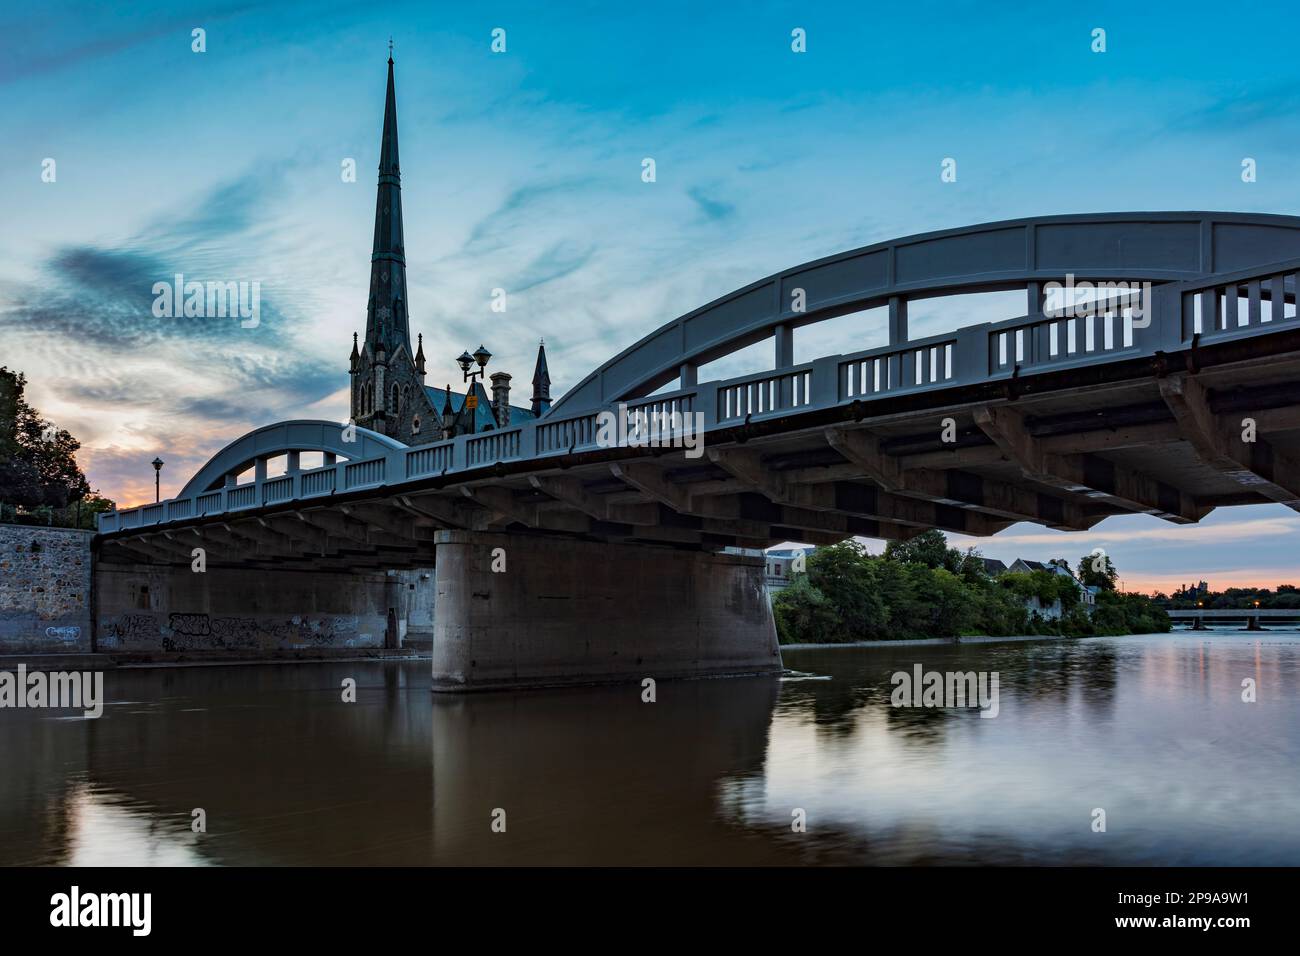 What photographers call Blue Hour casts a serene hue over the Grand River at Cambridge, Ontario, Canada. Stock Photo